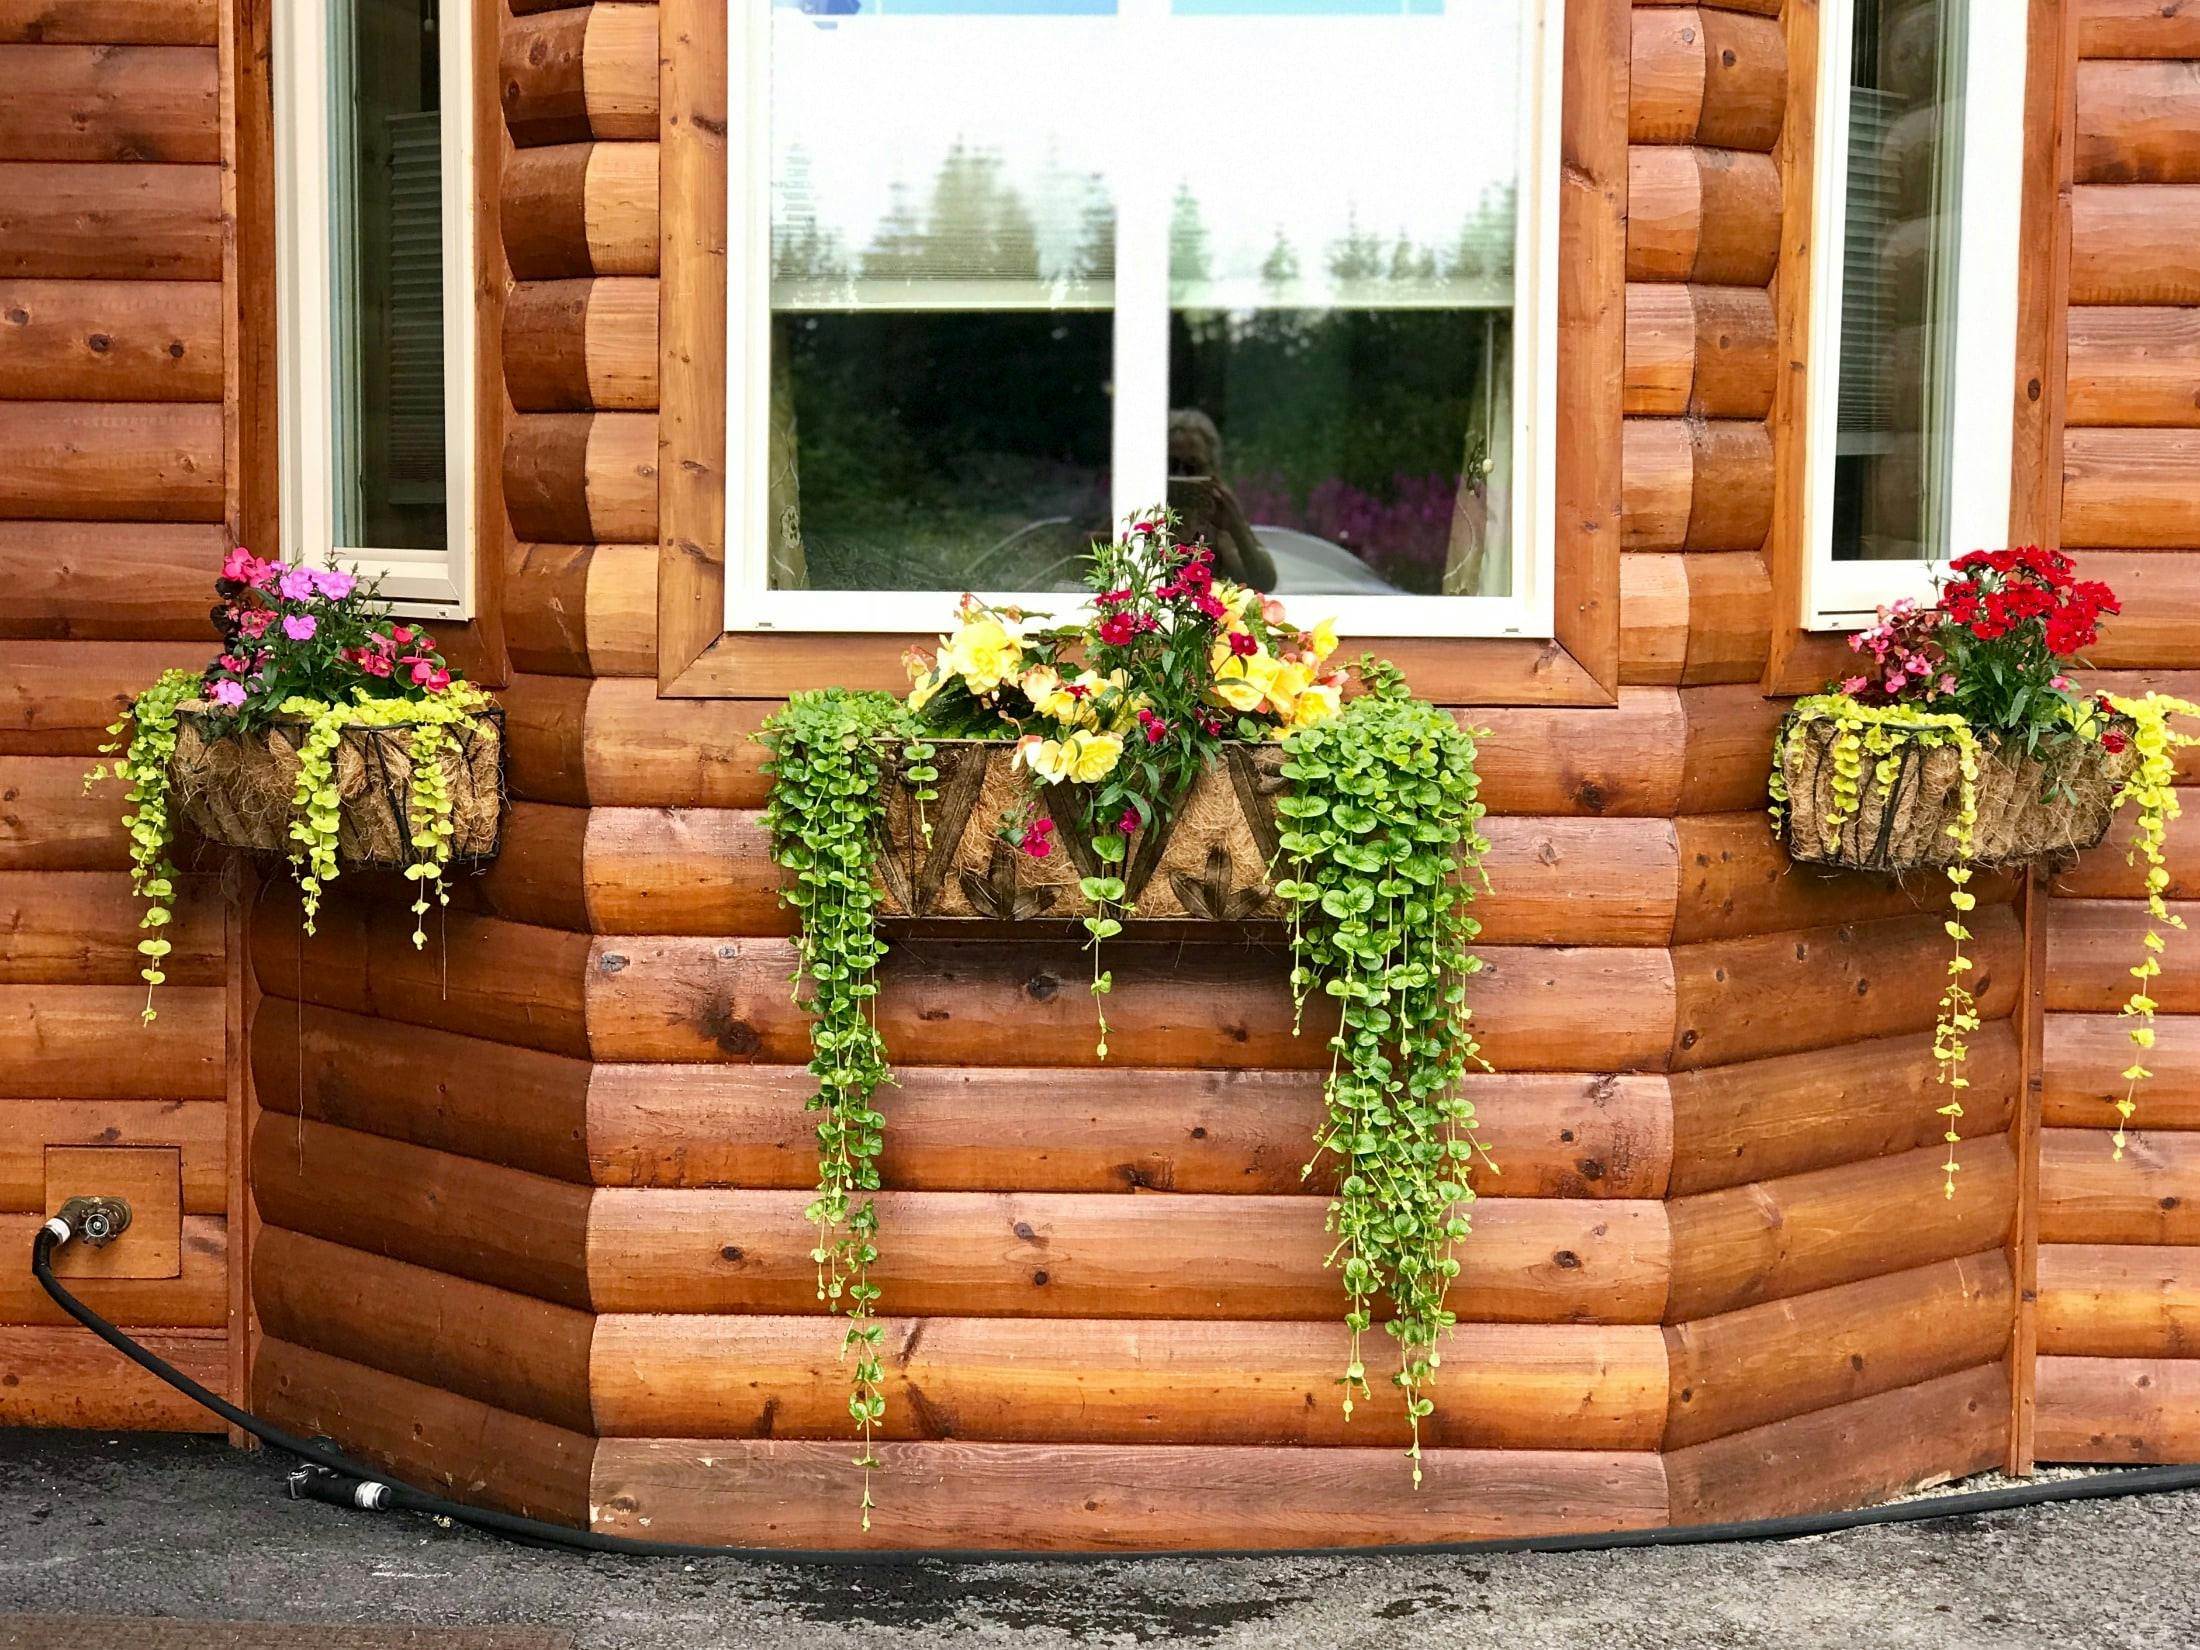 Log home bay window with flower boxes with yellow and pink flowers